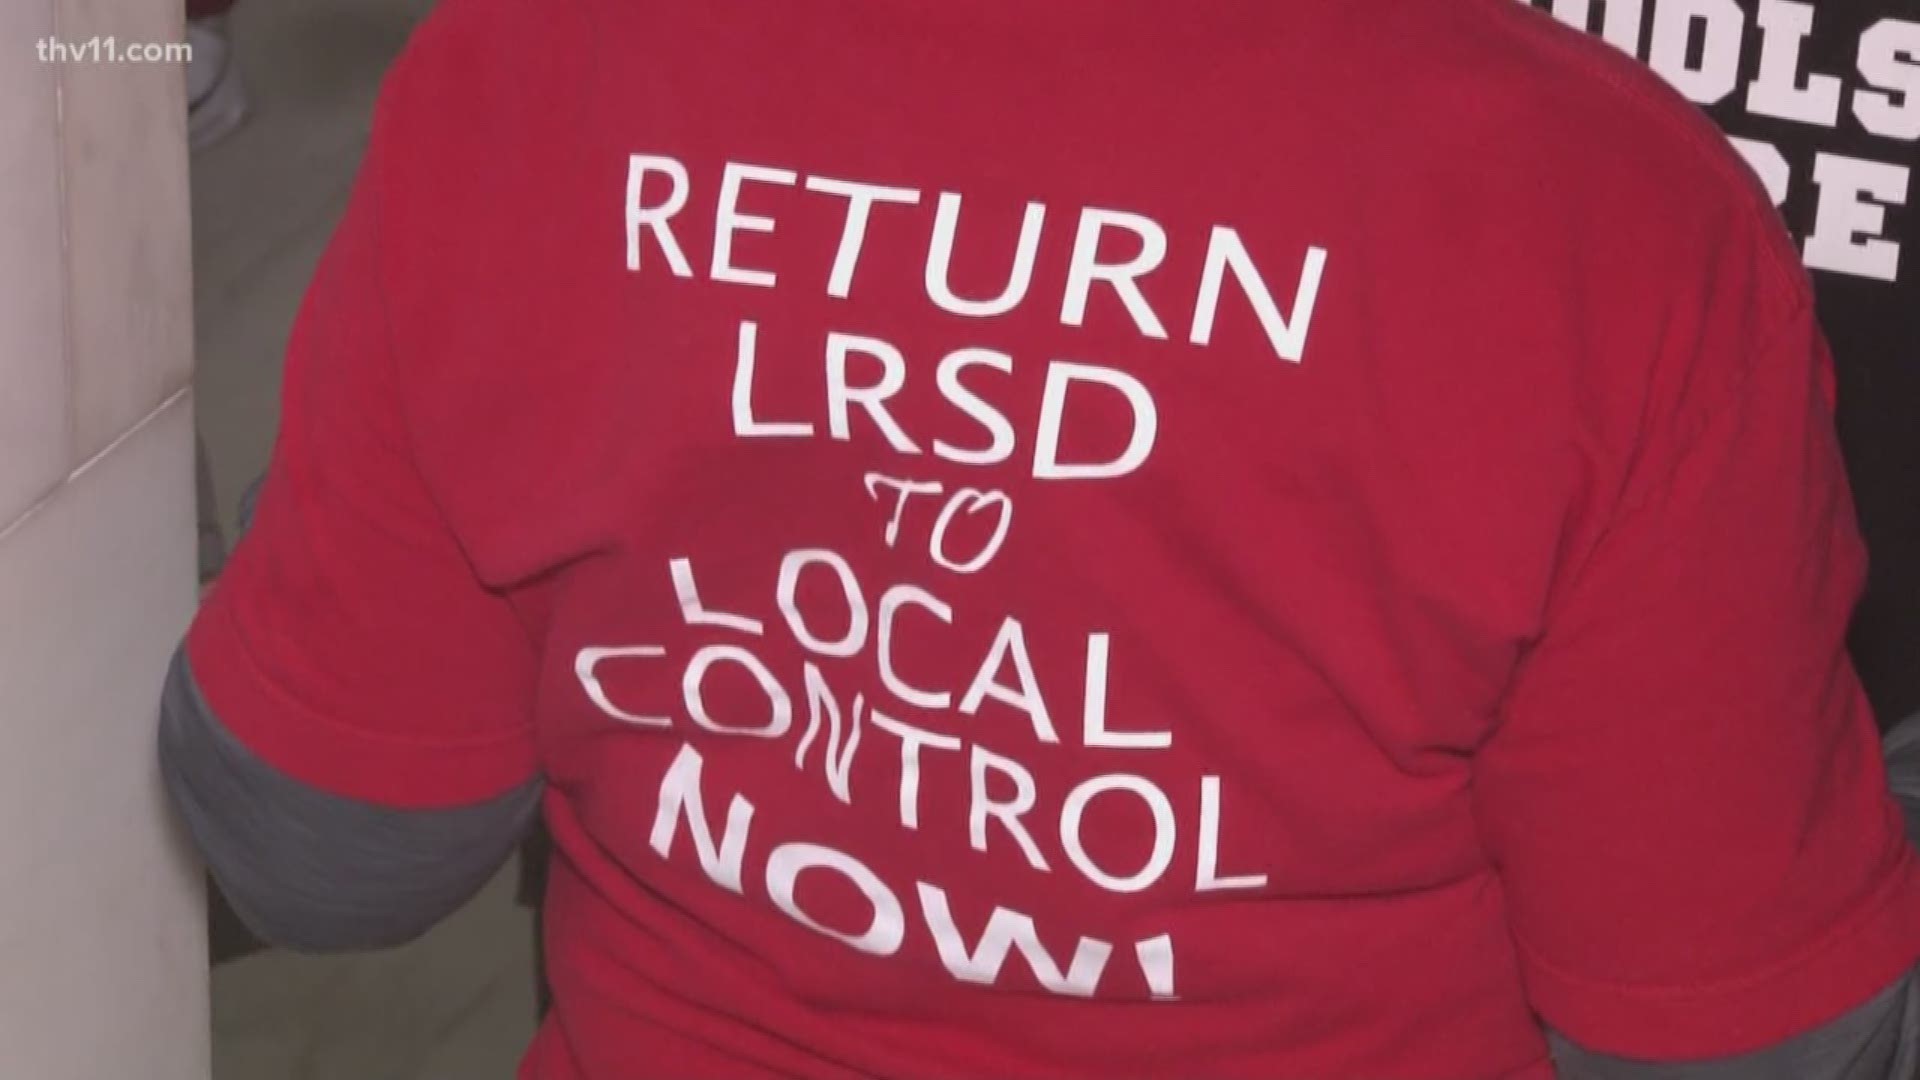 Supporters of the Little Rock School District have found frustration at every turn, as they try to bring it back under local control.